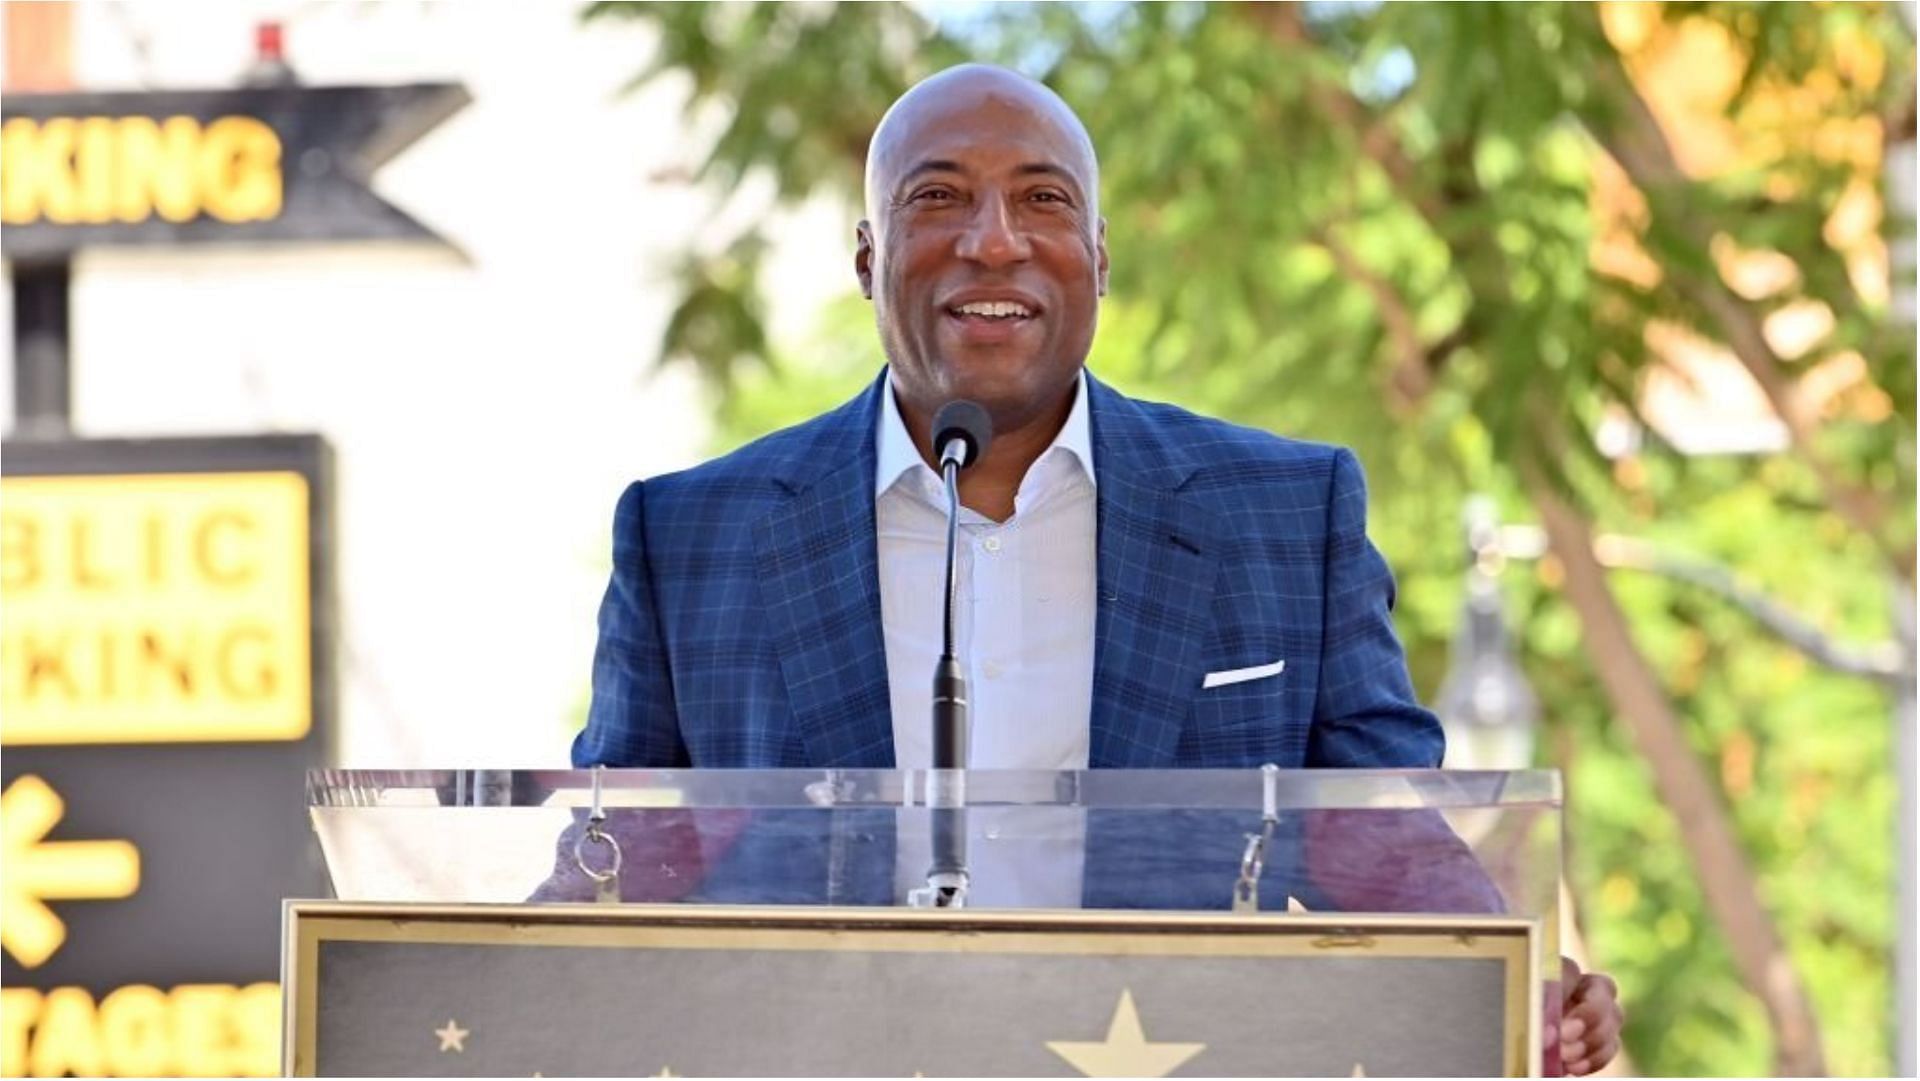 We find out how much Byron Allen is worth as the TV mogul buys a 100